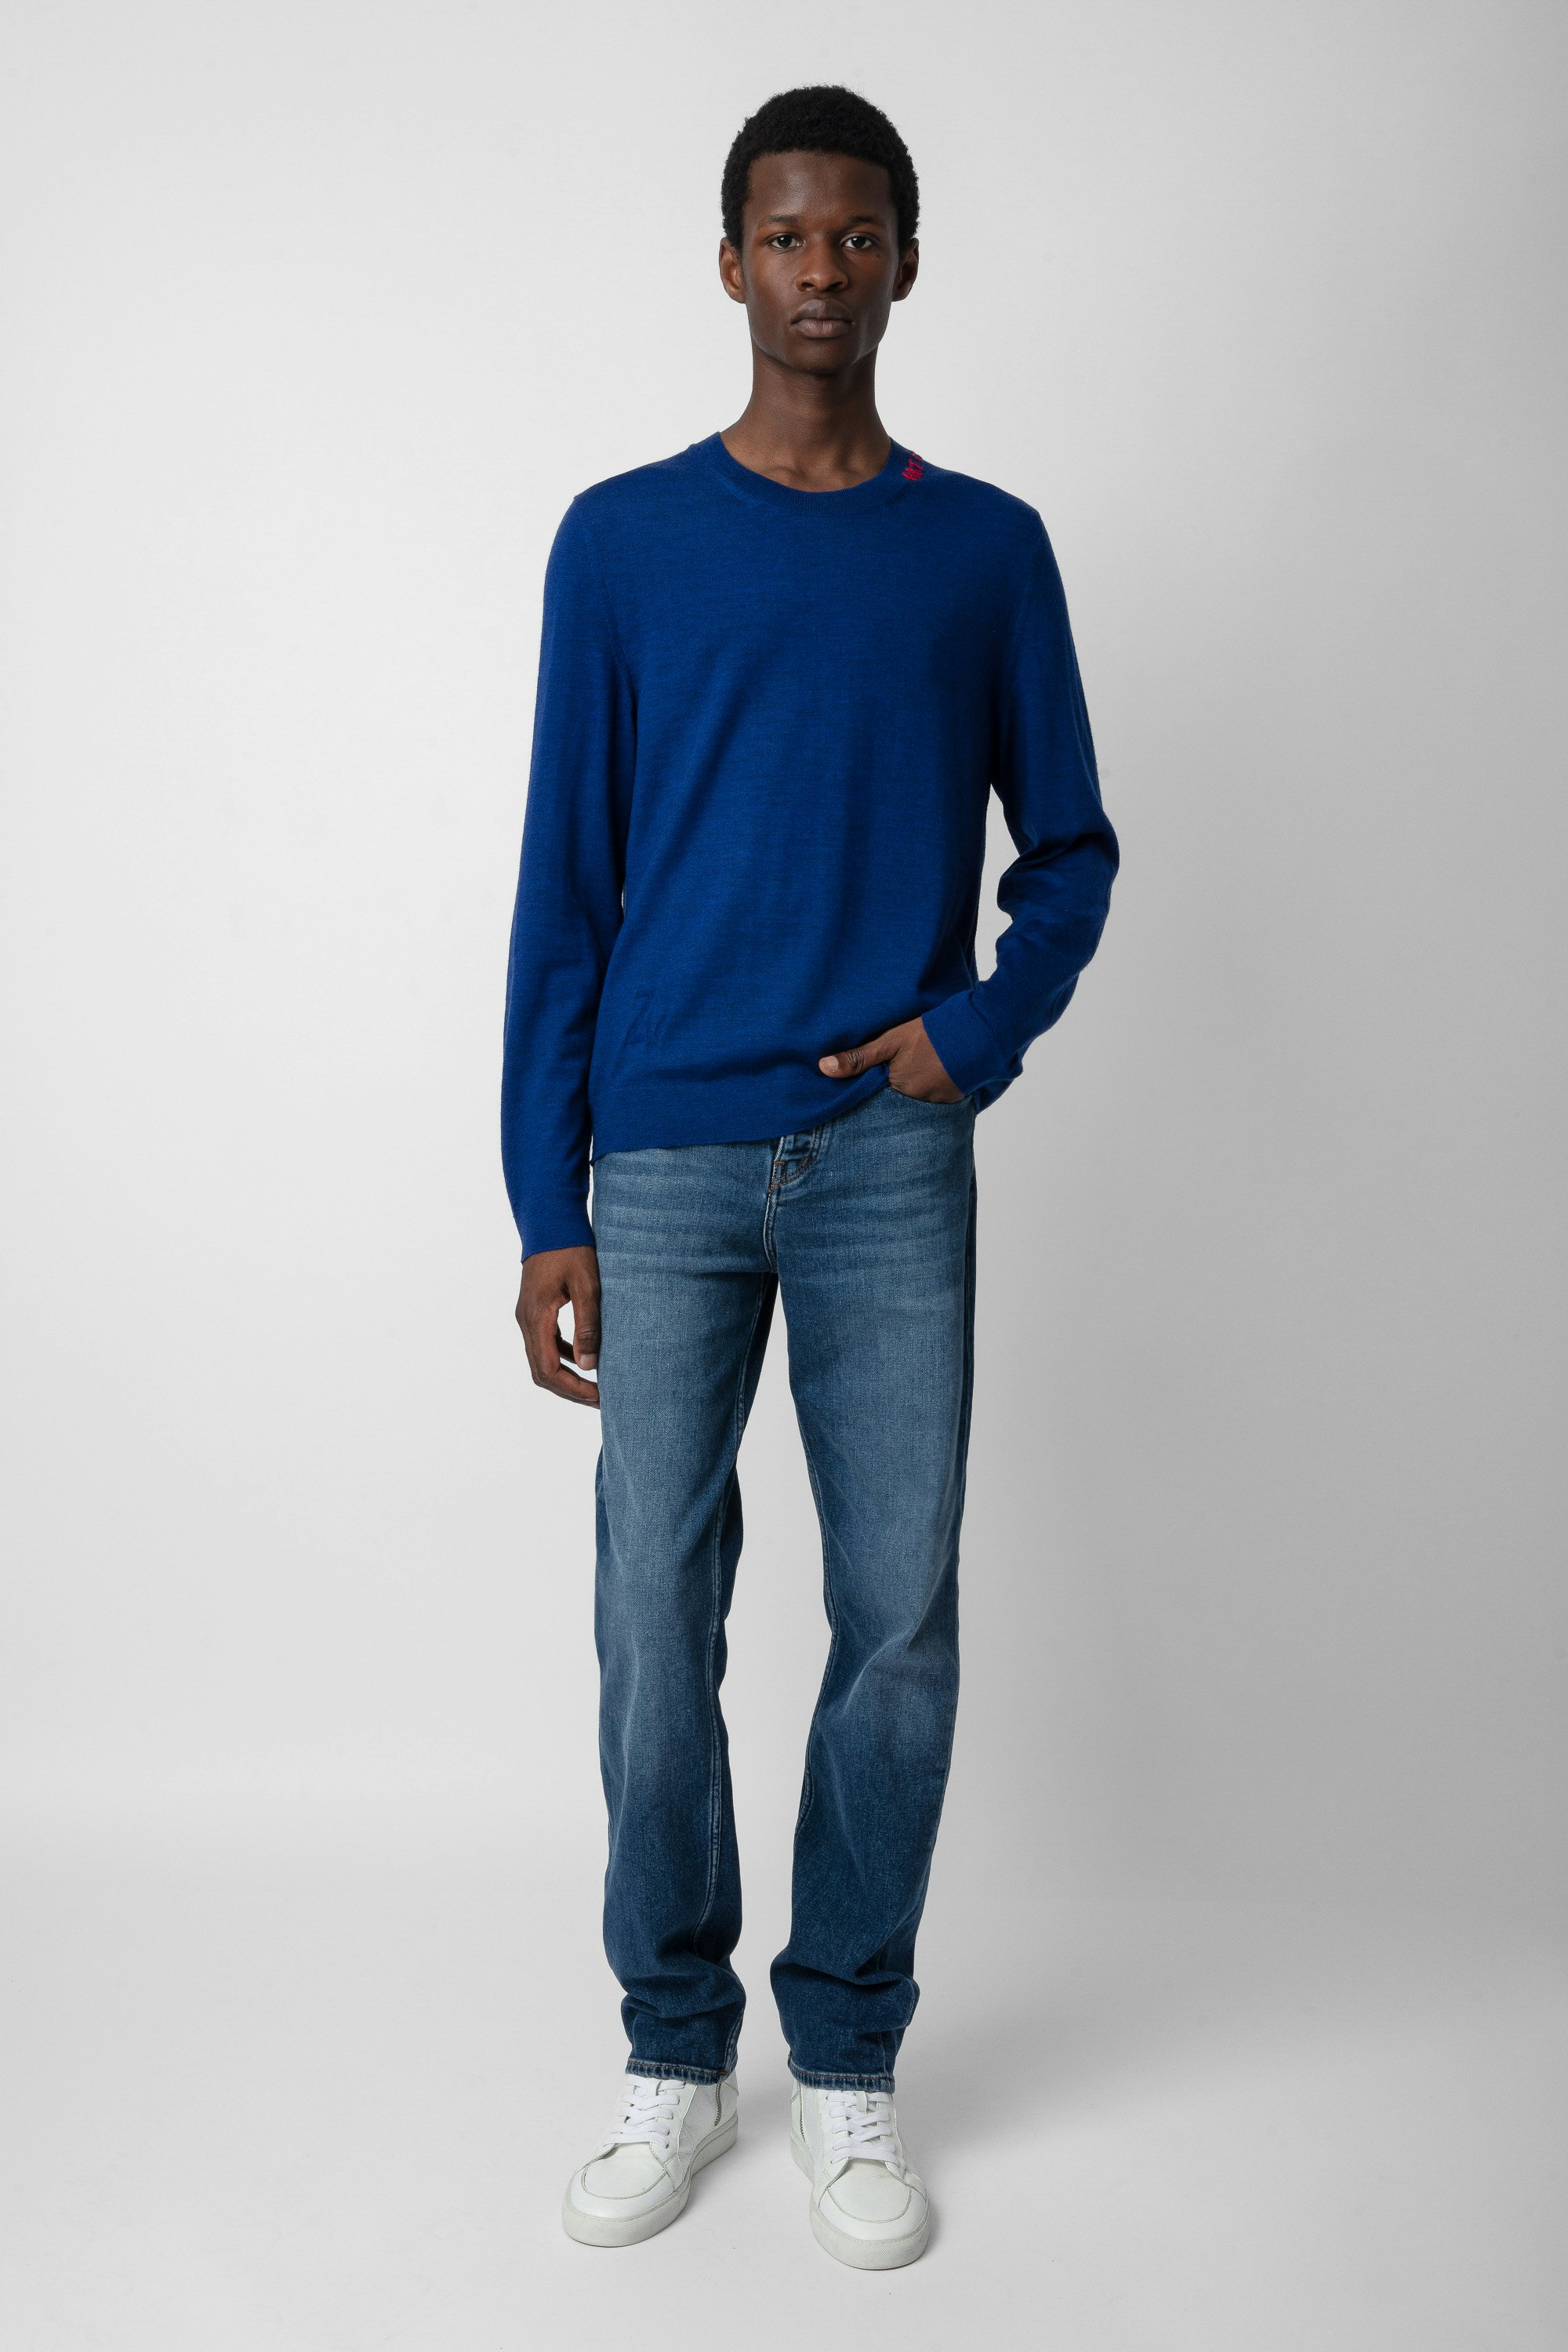 Kennedy Jumper - Men’s blue merino wool jumper with “Art Is Truth” embroidery on the neckline.